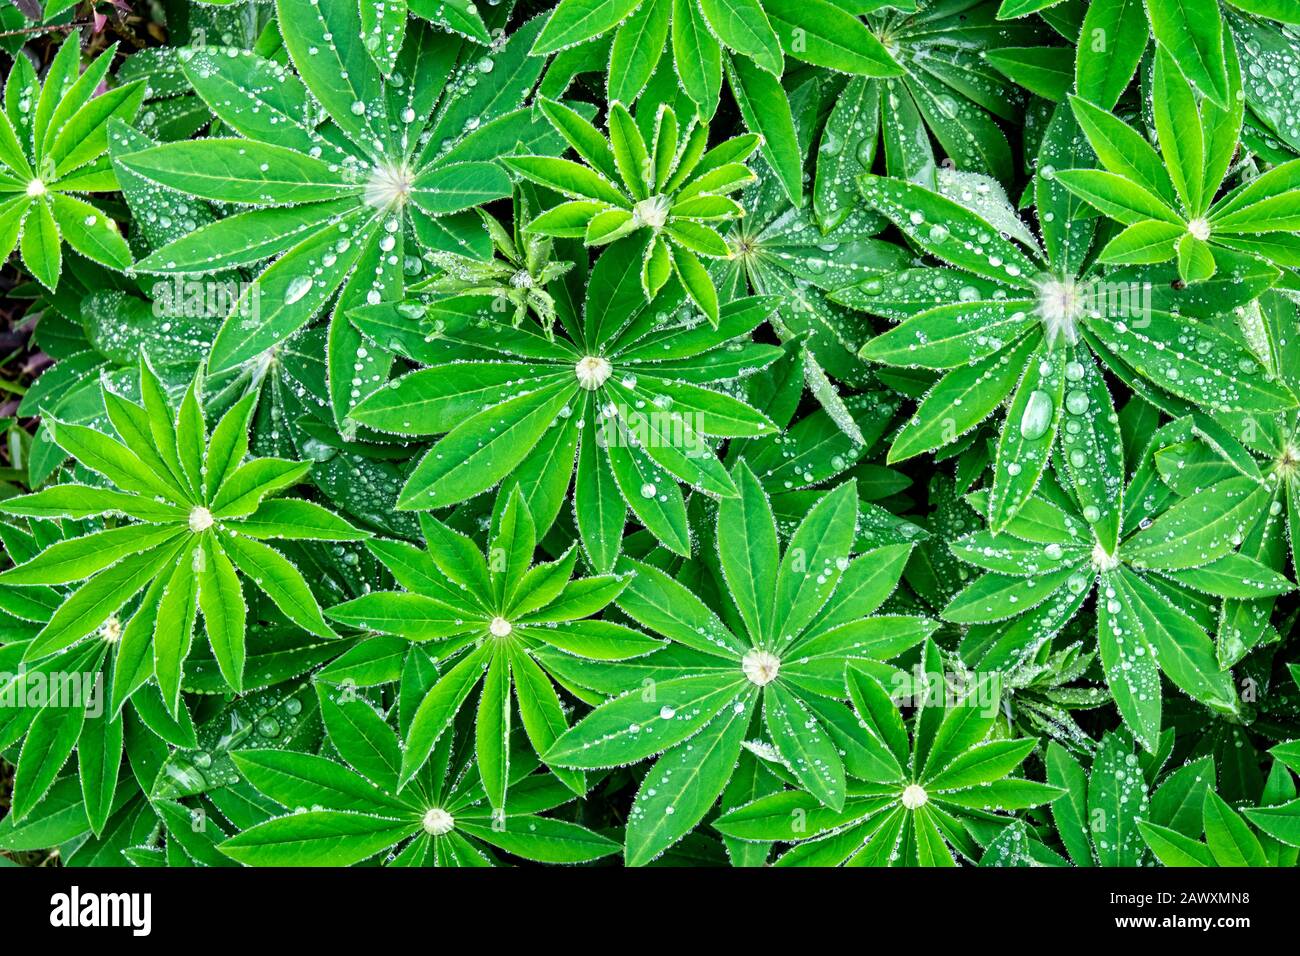 Water droplets on green Lupin leaves. UK Stock Photo